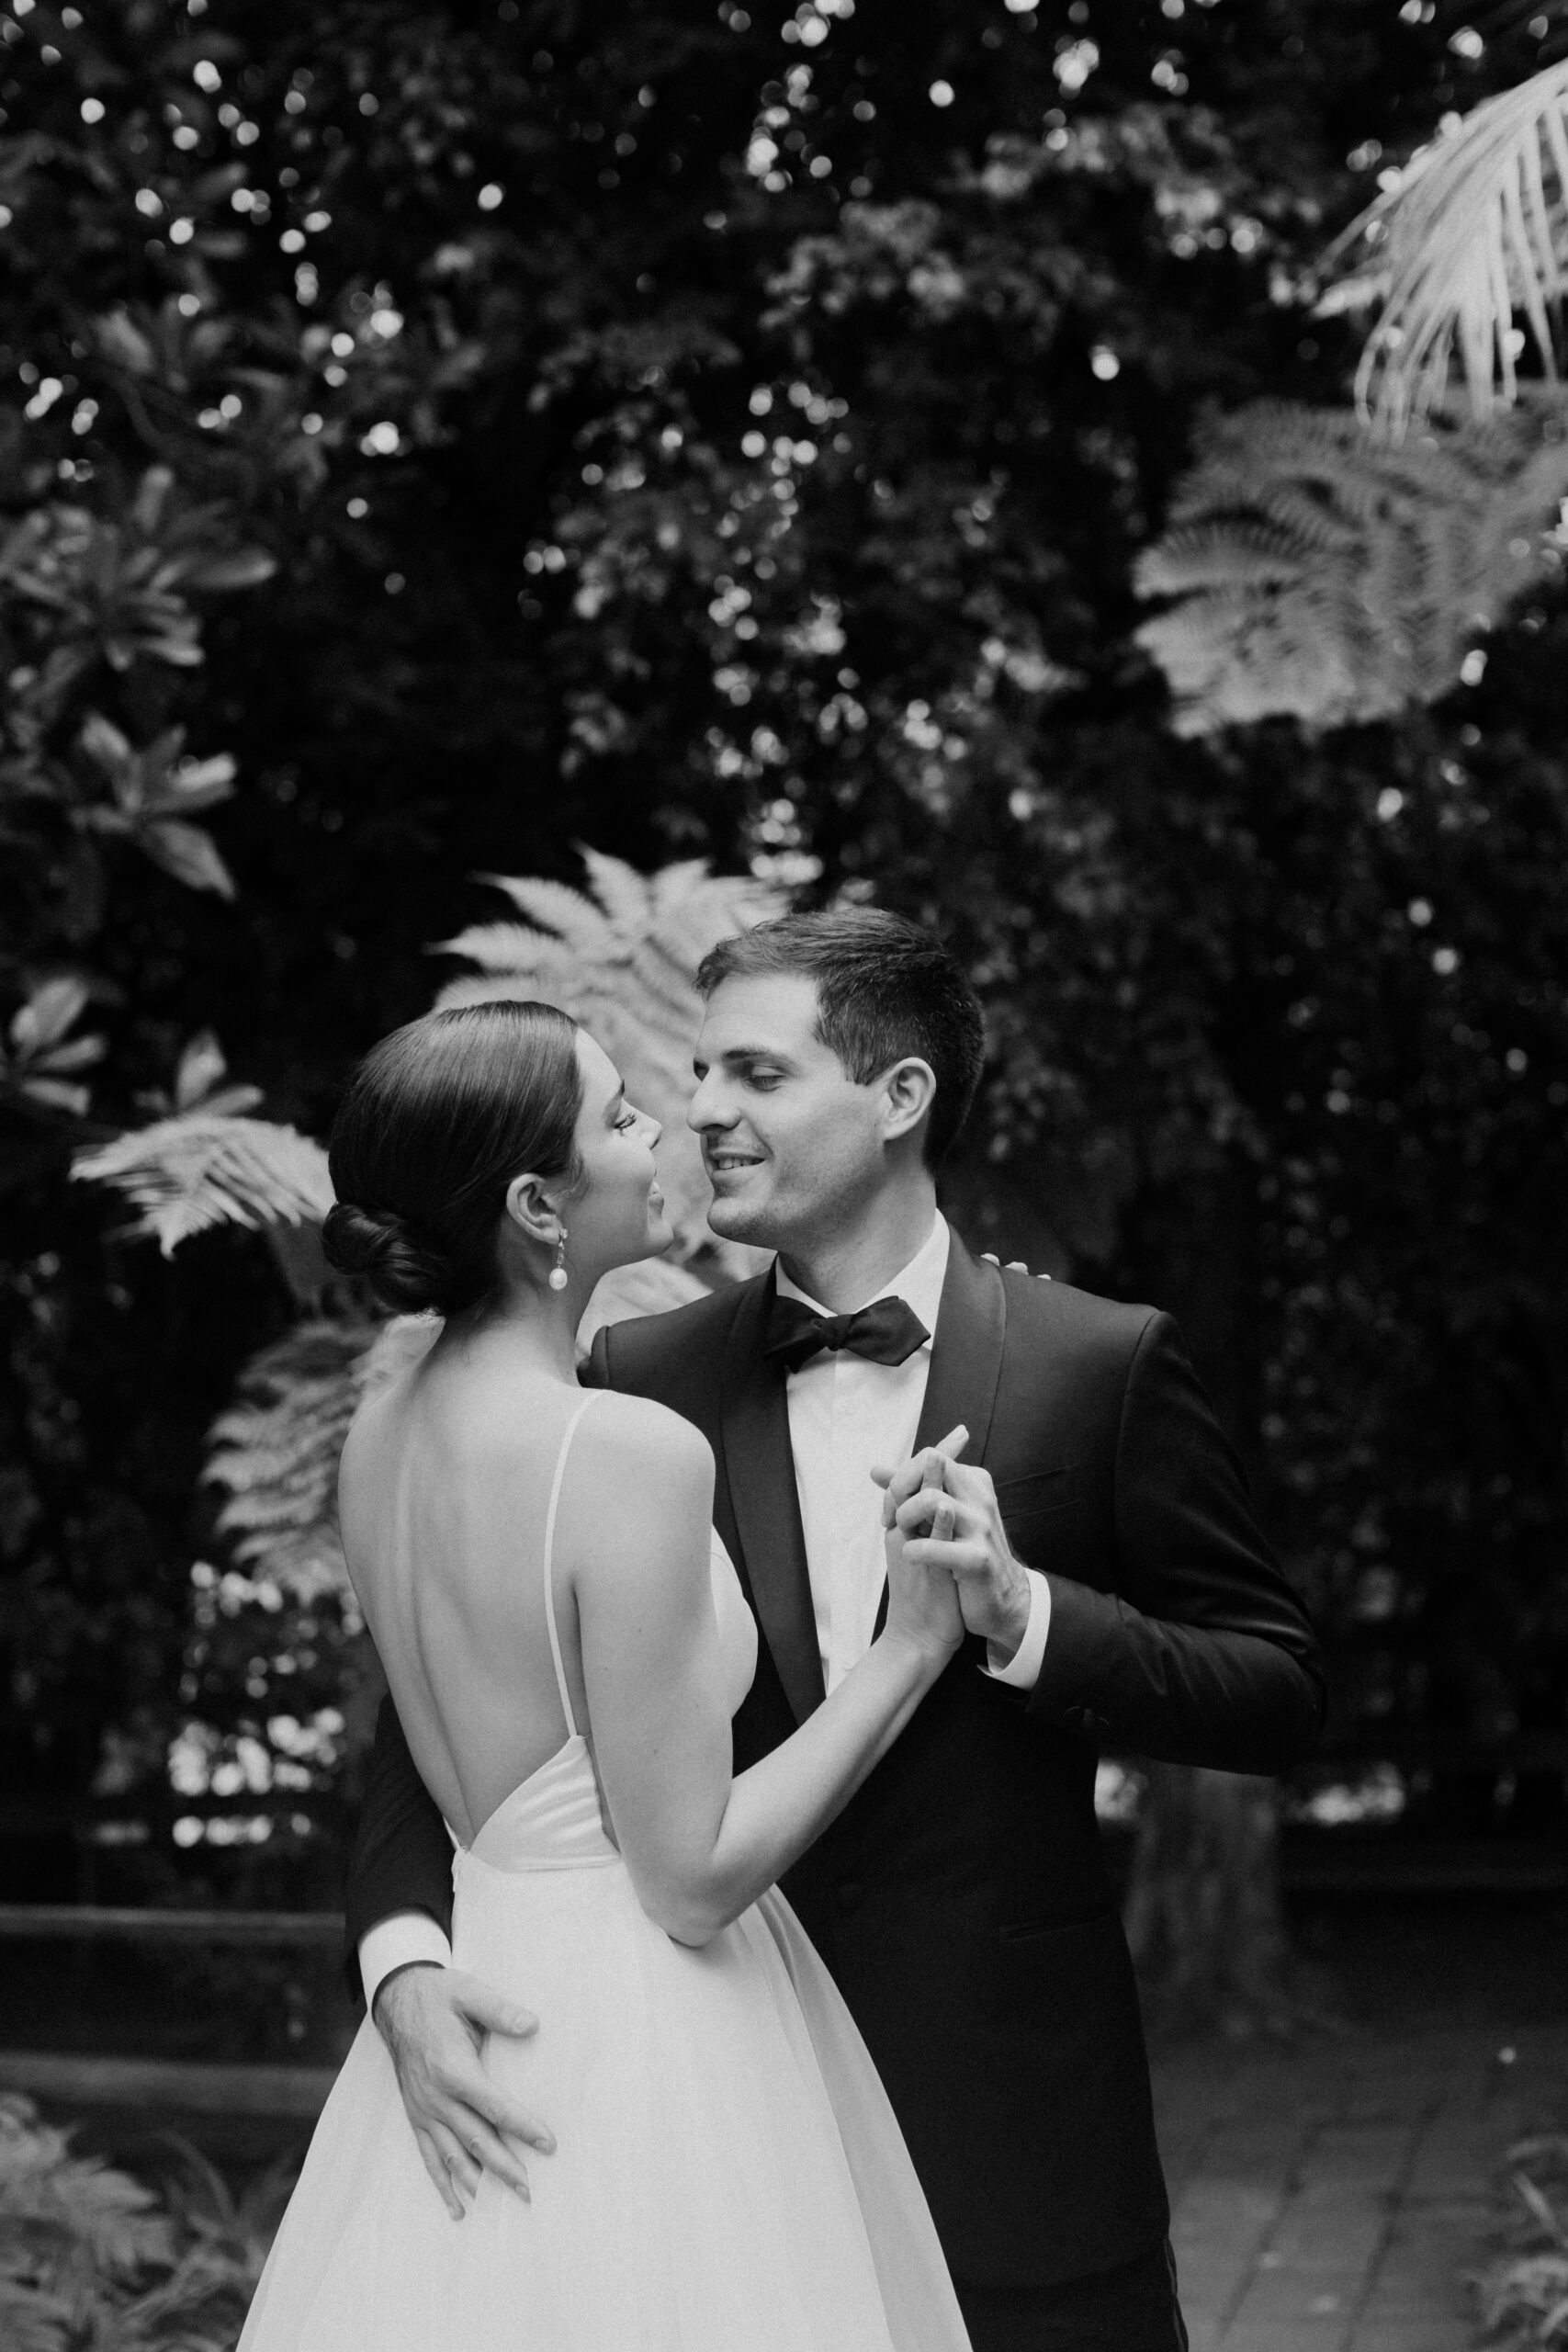 bride and groom pose together in a lush garden